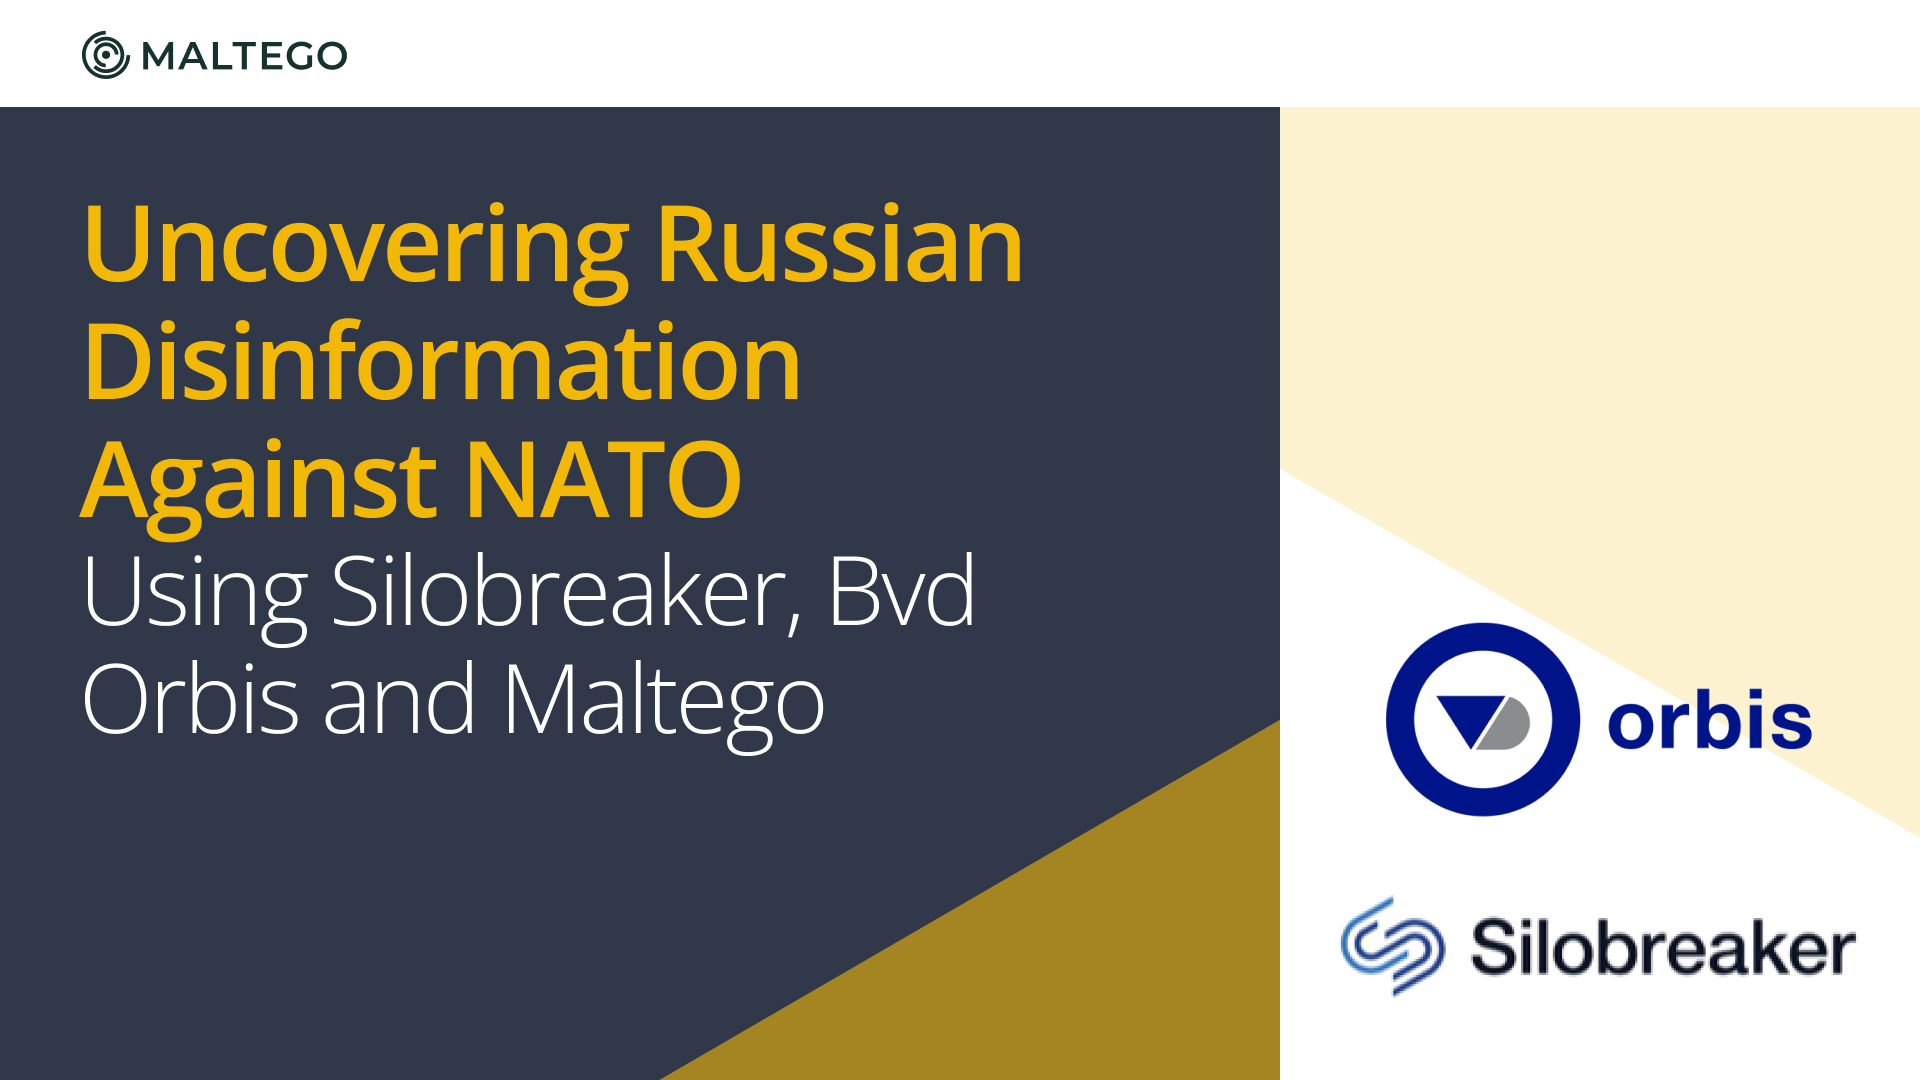 Uncovering Disinformation Against NATO With Maltego, Silobreaker, And Bvd Orbis » Chargebackpros